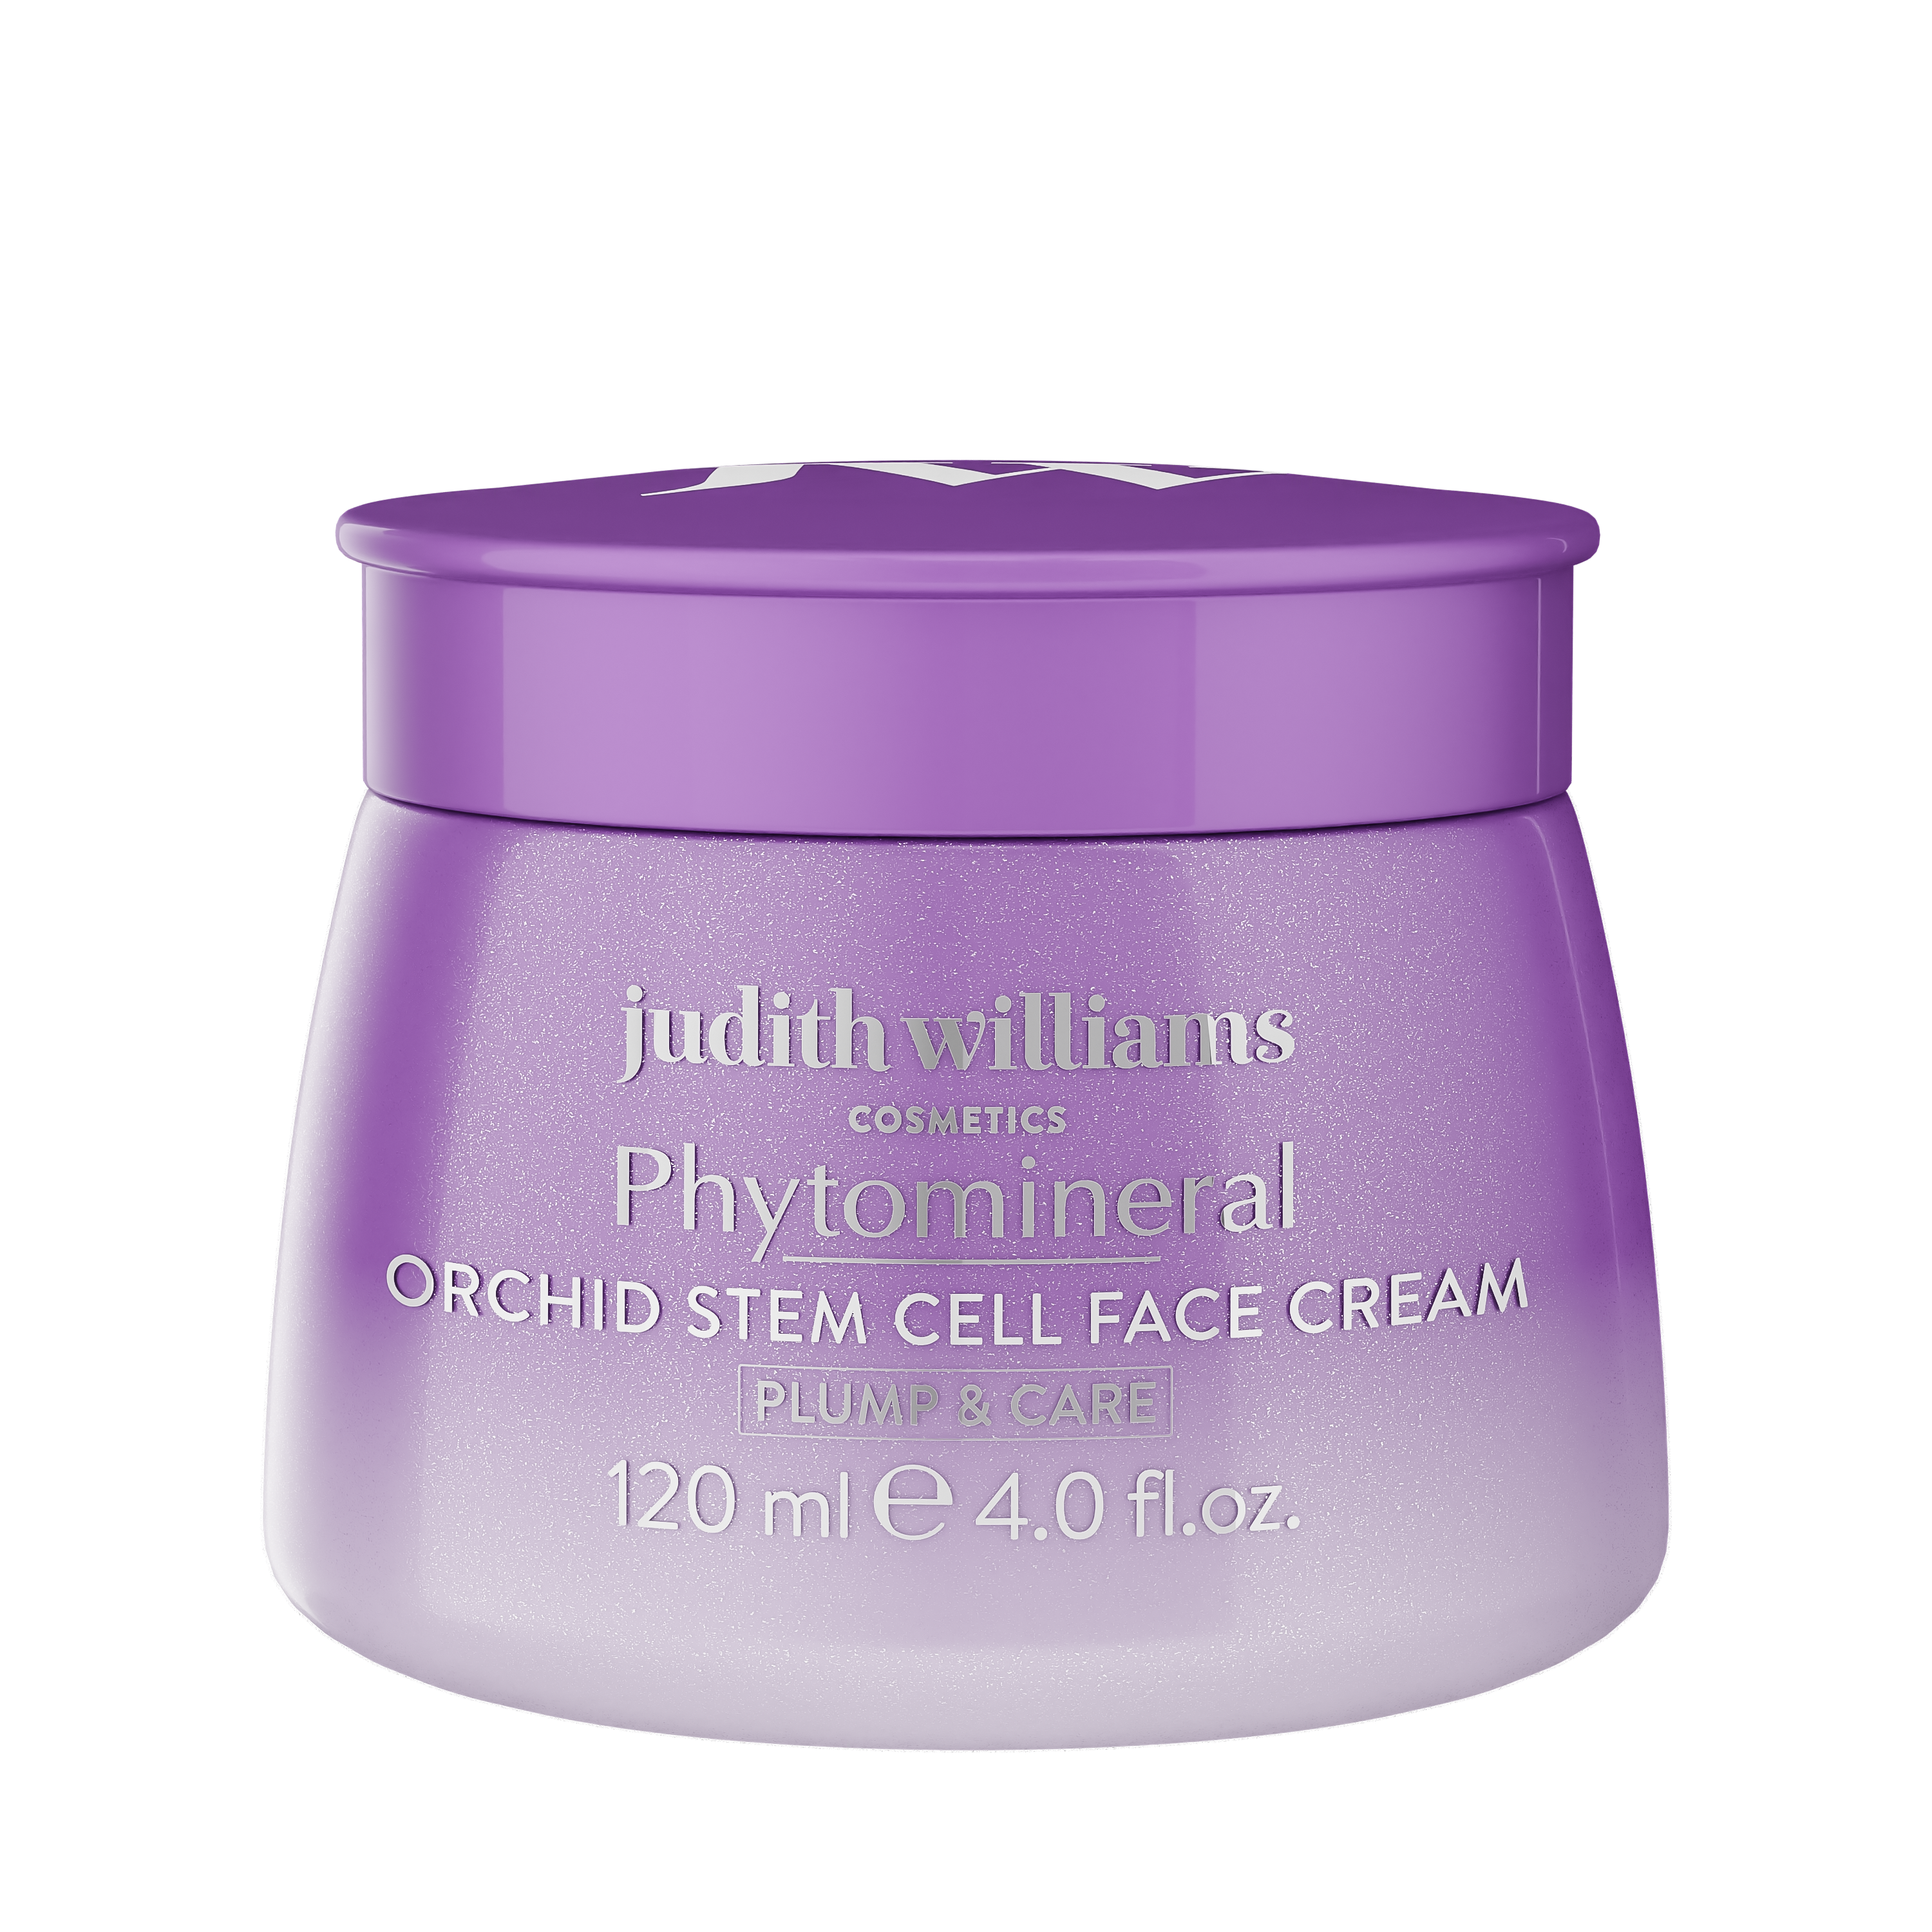 Gesichtscreme | Phytomineral | Orchid Stem Cell Face Cream | Judith Williams